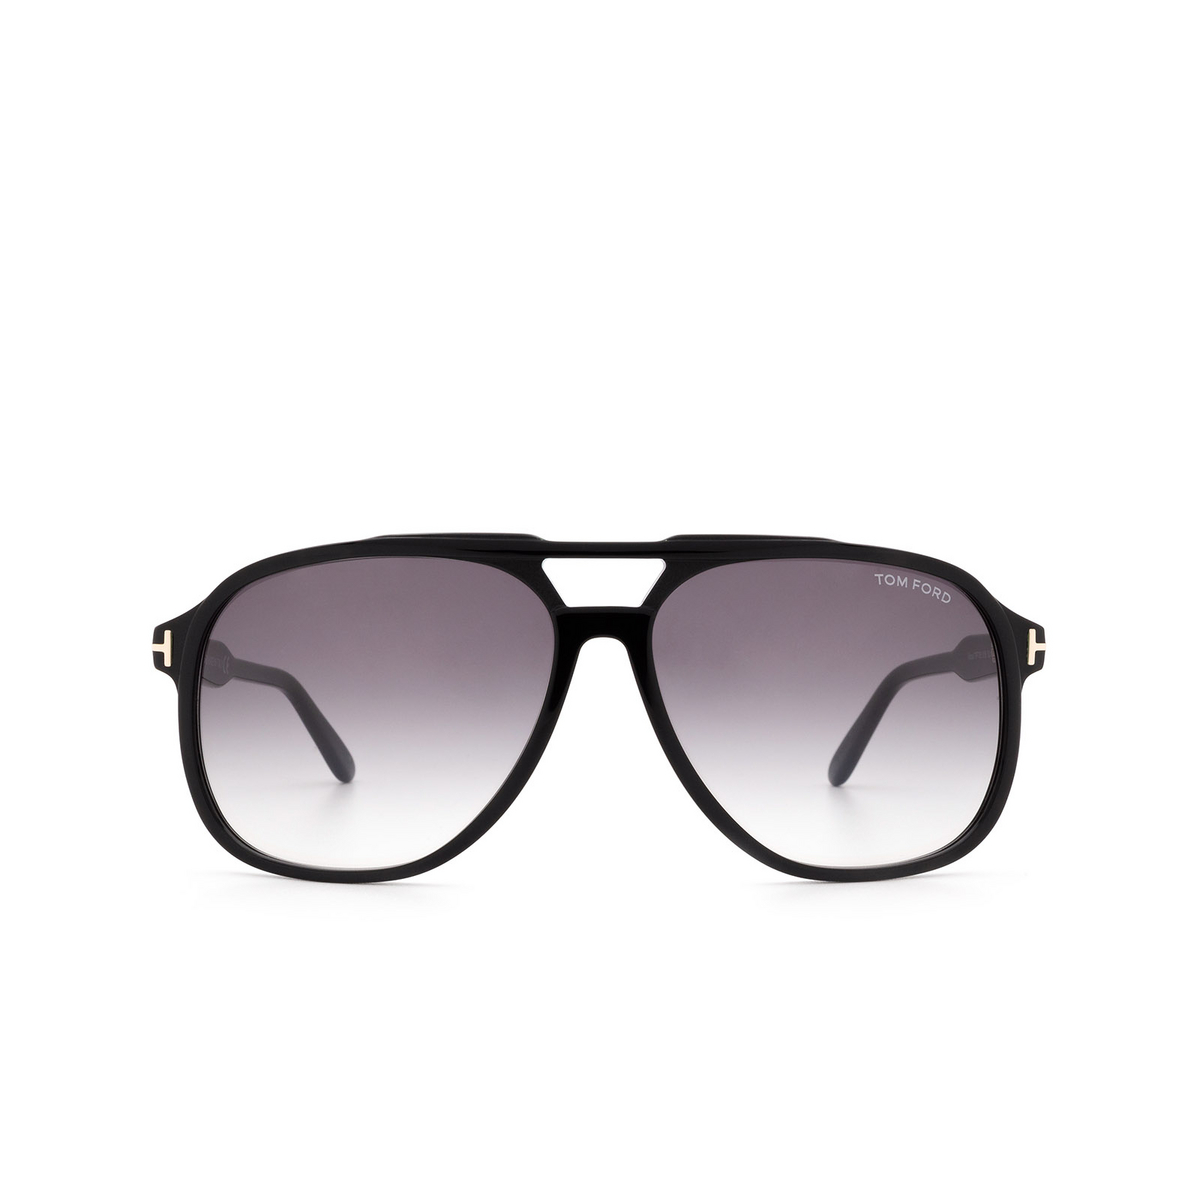 Tom Ford RAOUL Sunglasses 01B Shiny Black - front view